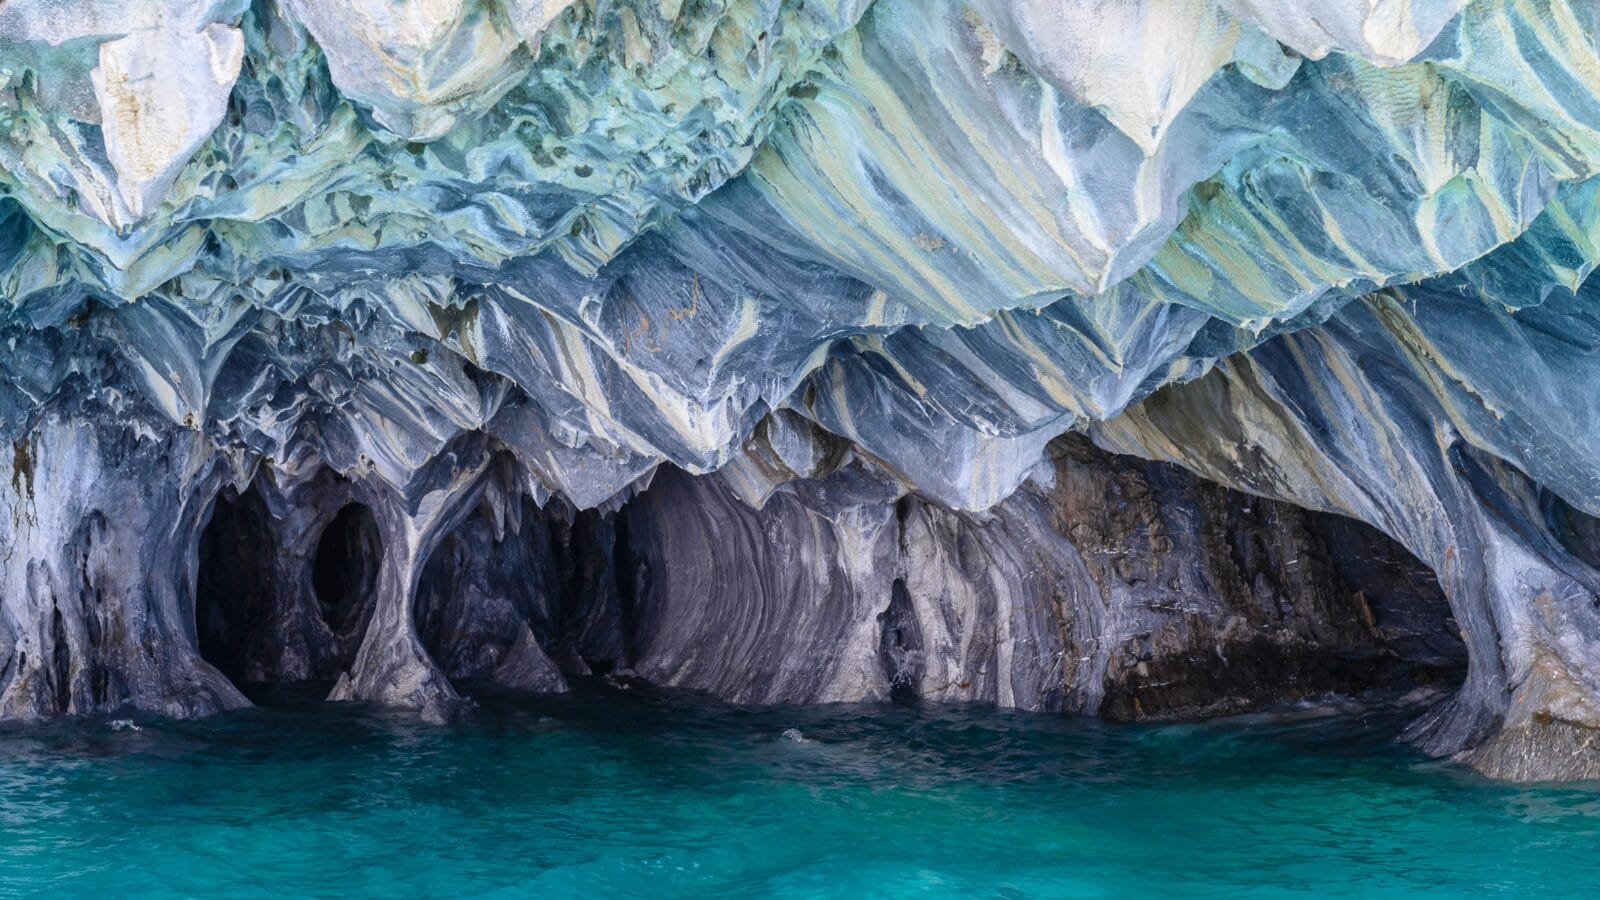 <p>The marble caves of Chile are a marvelous nature preserve and one of the world’s most unusual cave systems. Carved into the sides of the Patagonian Andes, they rest on a marble peninsula and border the ancient glacial lake of General Carrera, which played a crucial role in the cave system’s development.</p><p>While beauty is in the eyes of the beholder, it’s hard not to gaze at the cave’s cerulean pillars and naturally decorated ceilings with awe and respect for Mother Nature.</p>